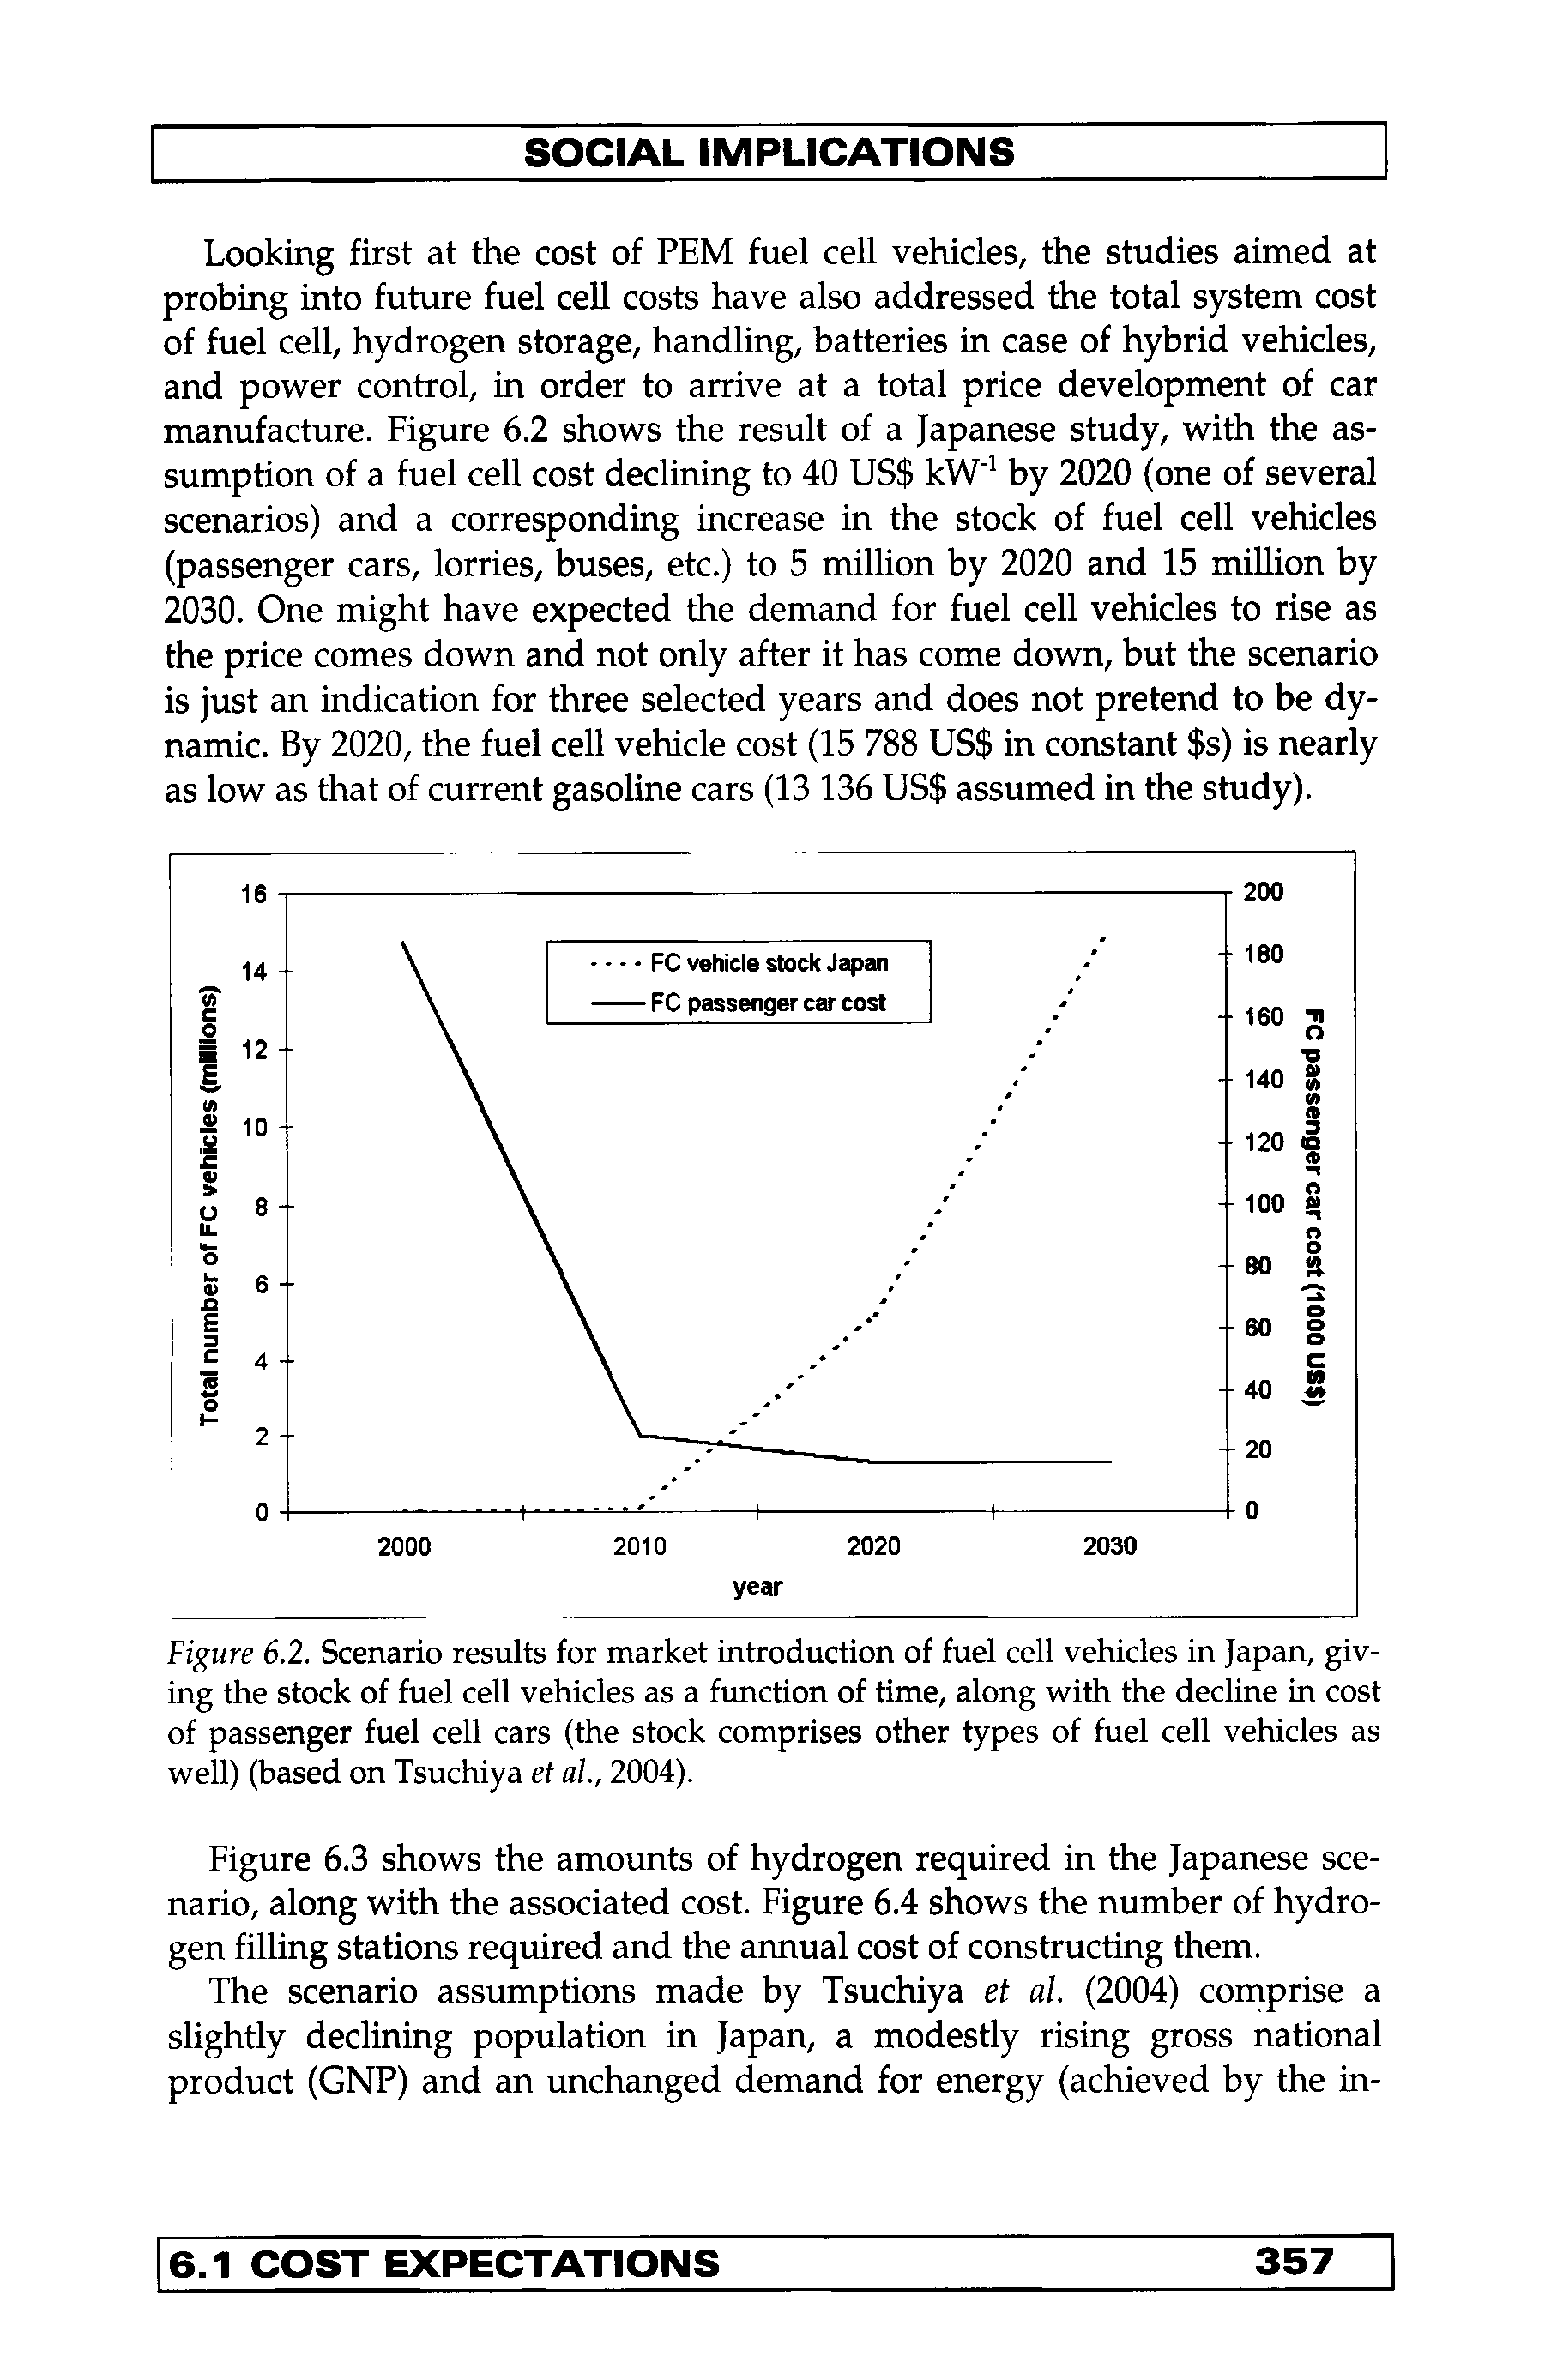 Figure 6.2. Scenario results for market introduction of fuel cell vehicles in Japan, giving the stock of fuel cell vehicles as a function of time, along with the decline in cost of passenger fuel cell cars (the stock comprises other types of fuel cell vehicles as well) (based on Tsuchiya et ah, 2004).